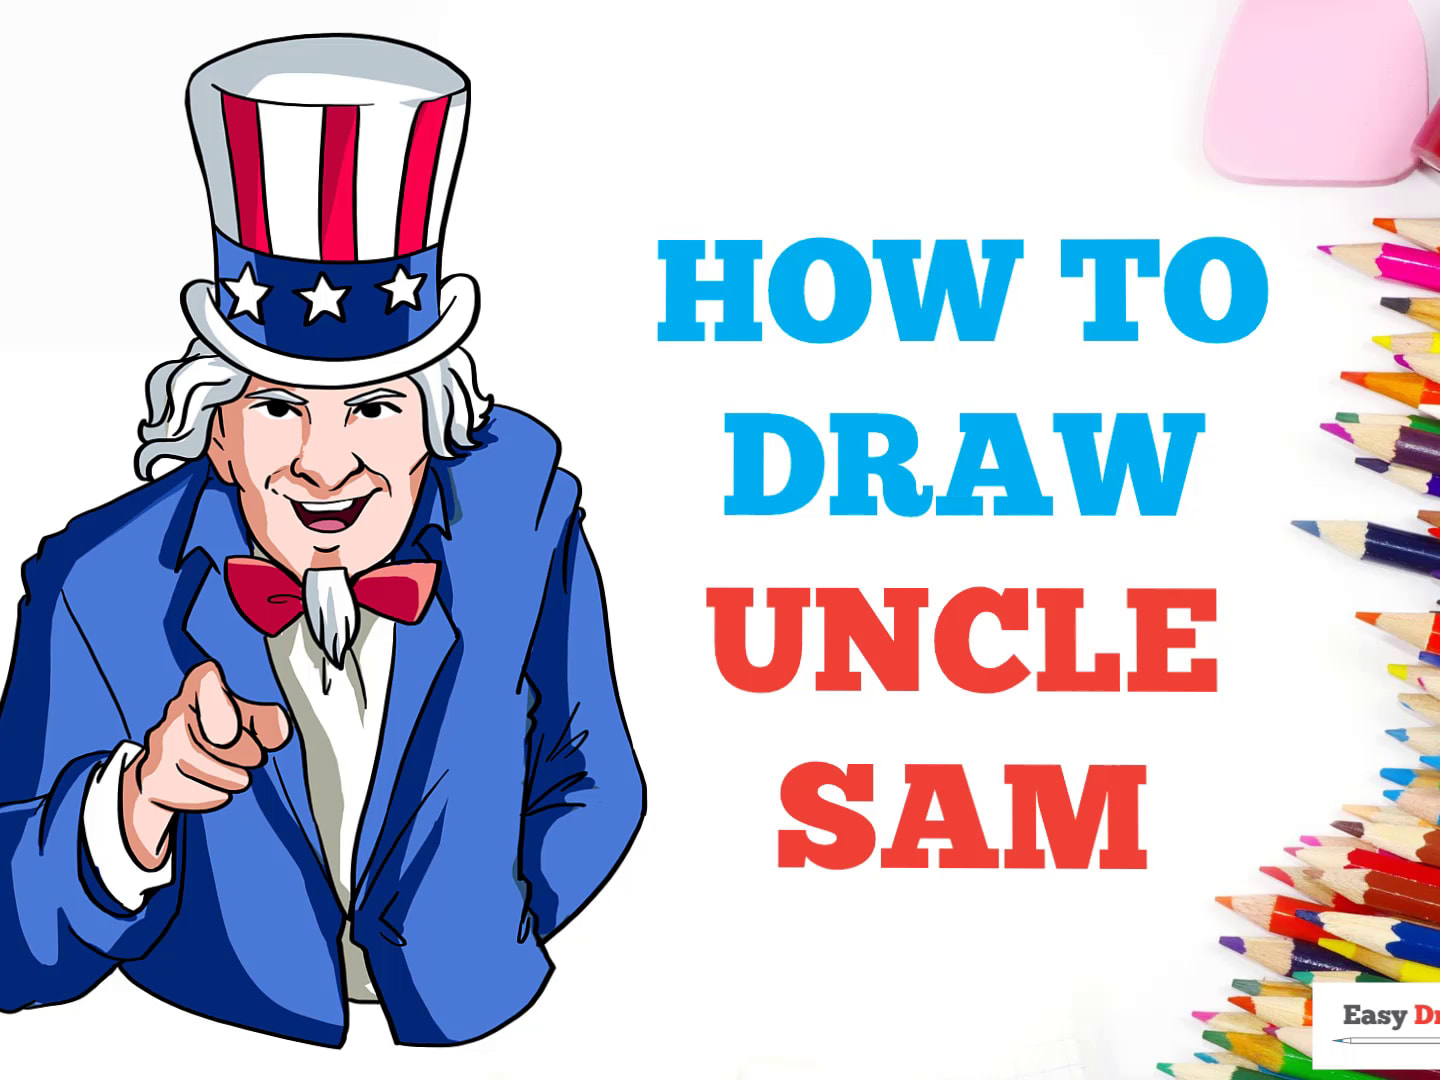 How to draw uncle sam